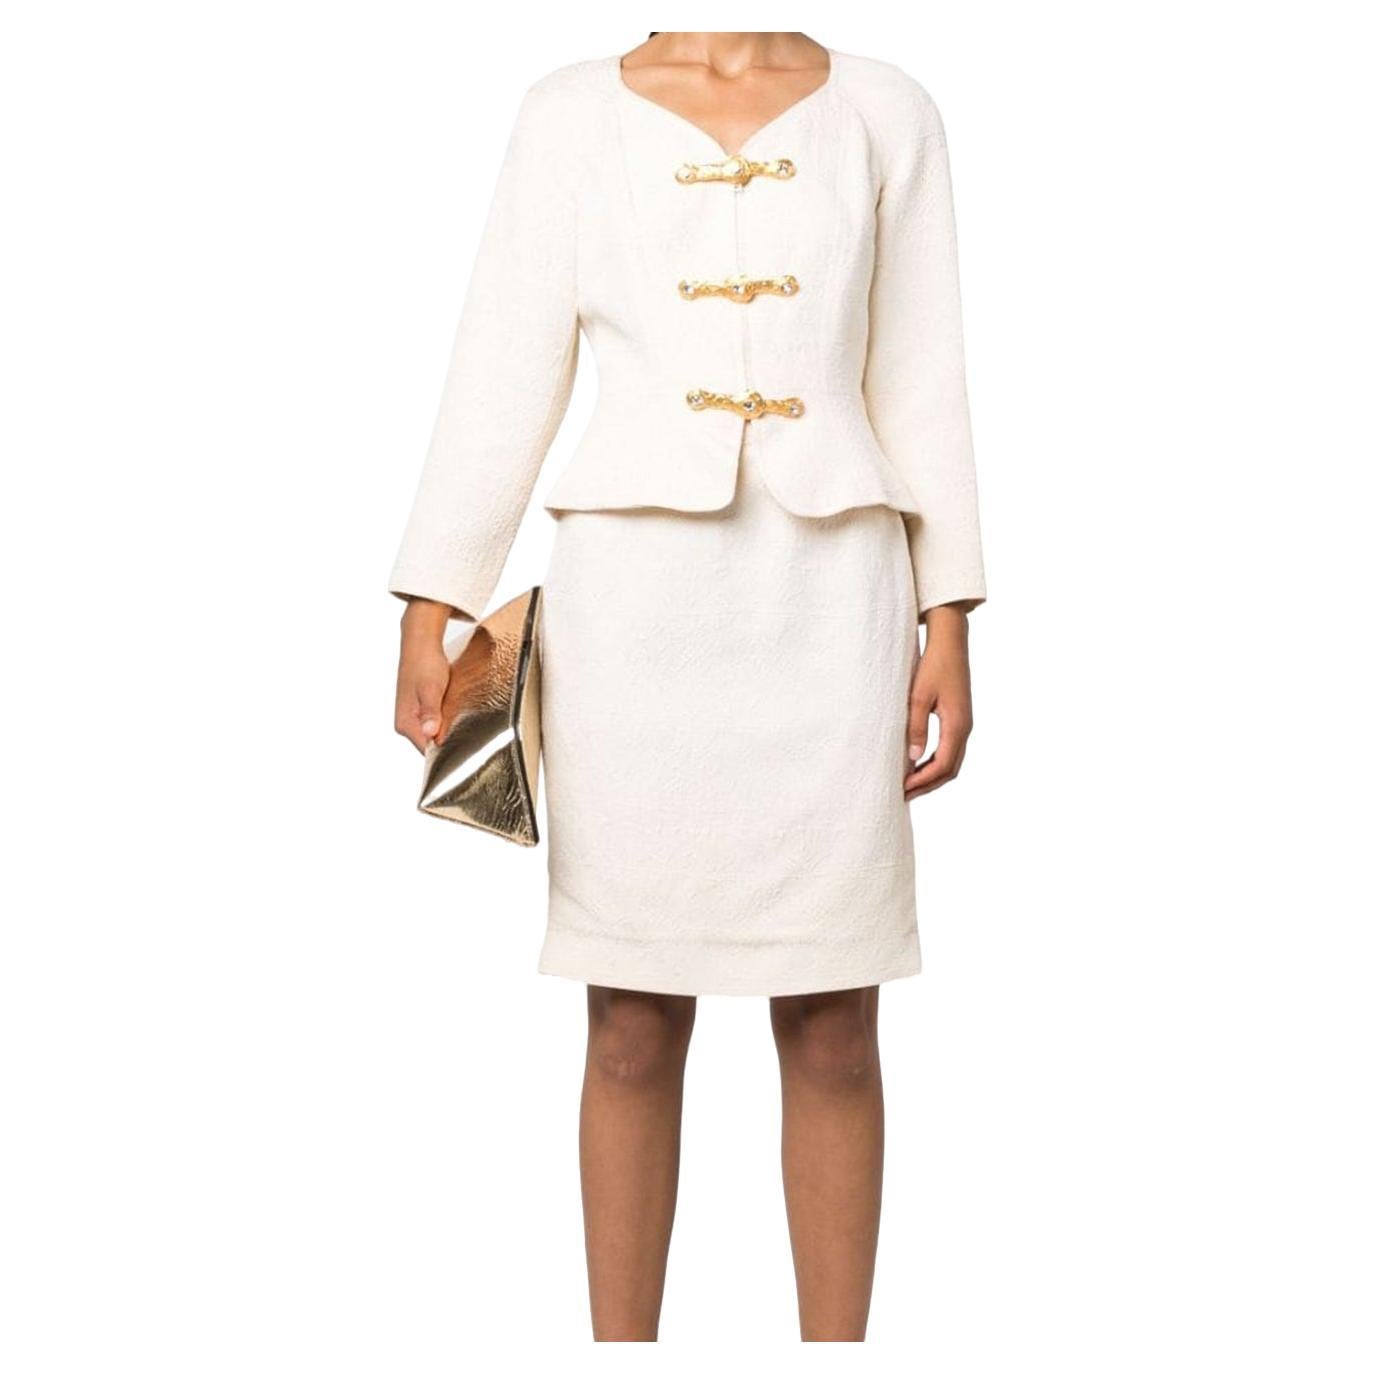 Christian Lacroix cream white toggle-fastening jacquard skirt suit featuring a wool-silk blend, a full jacquard.
Jacket gets a V-neck, a front jewel toggle fastening, crop sleeves, a peplum hem, a silk lining.
Skirt gets high waist, a concealed side